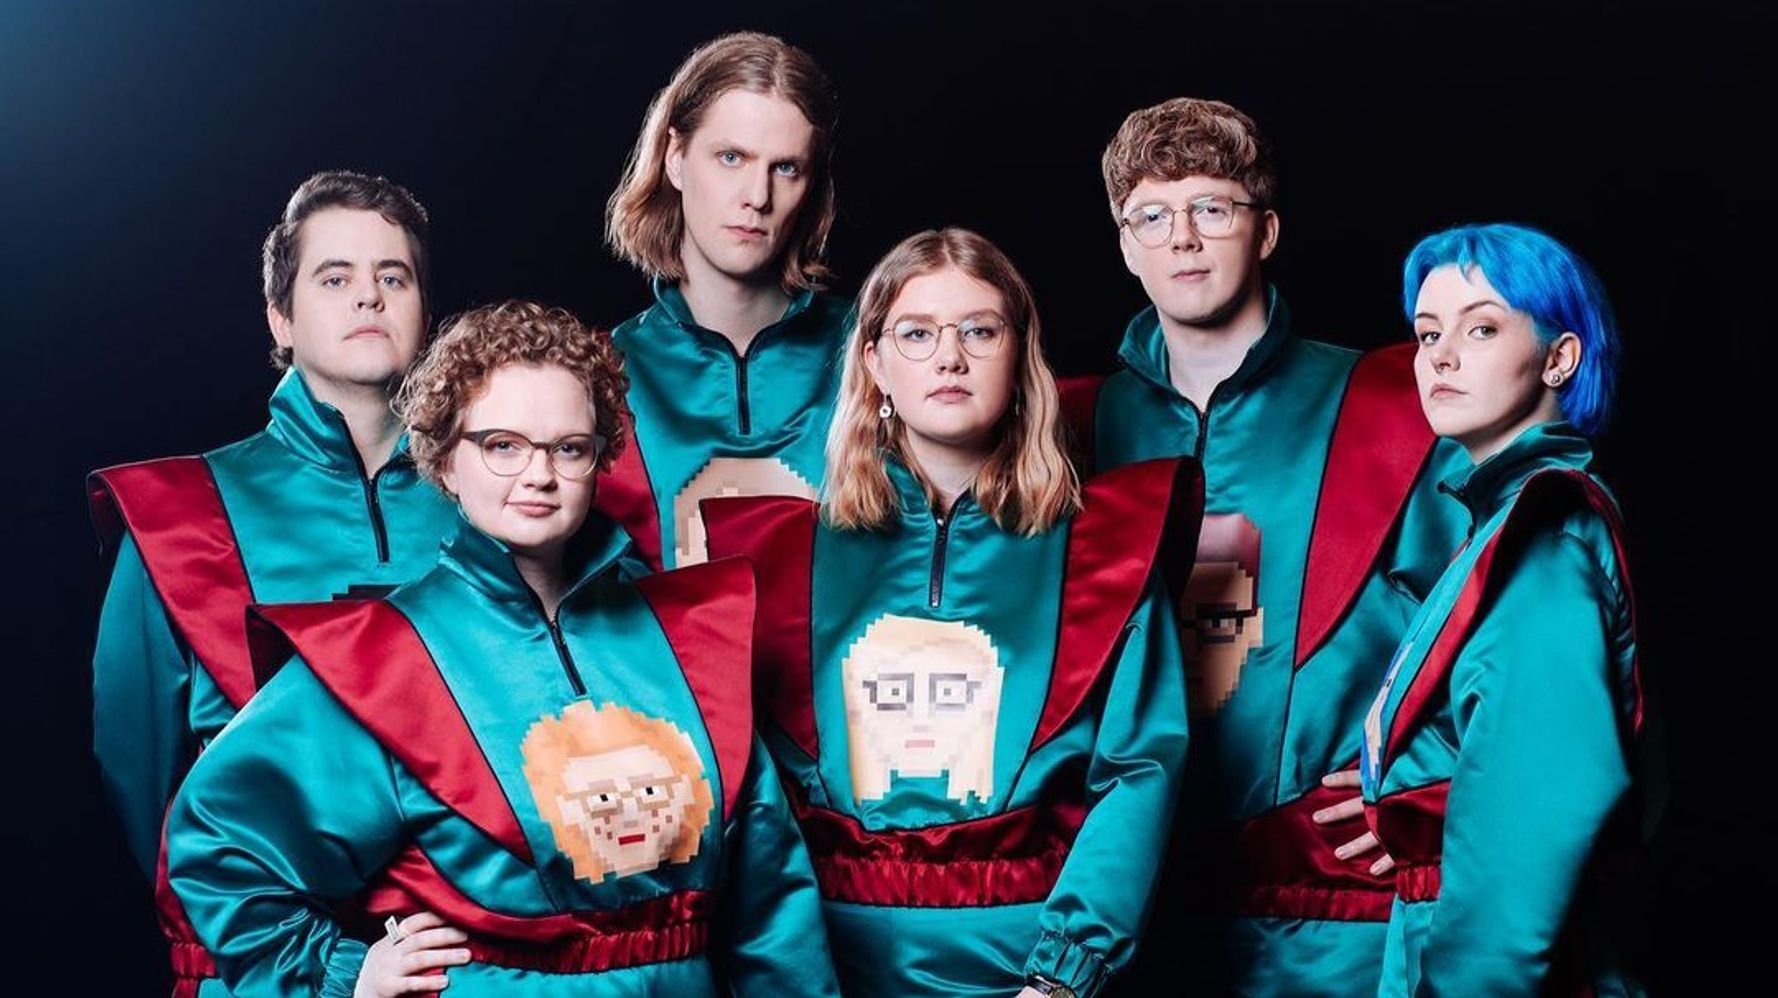 Iceland Eurovision Act Daði Og Gagnamagnið Unable To Perform After Band Member Contracts Covid